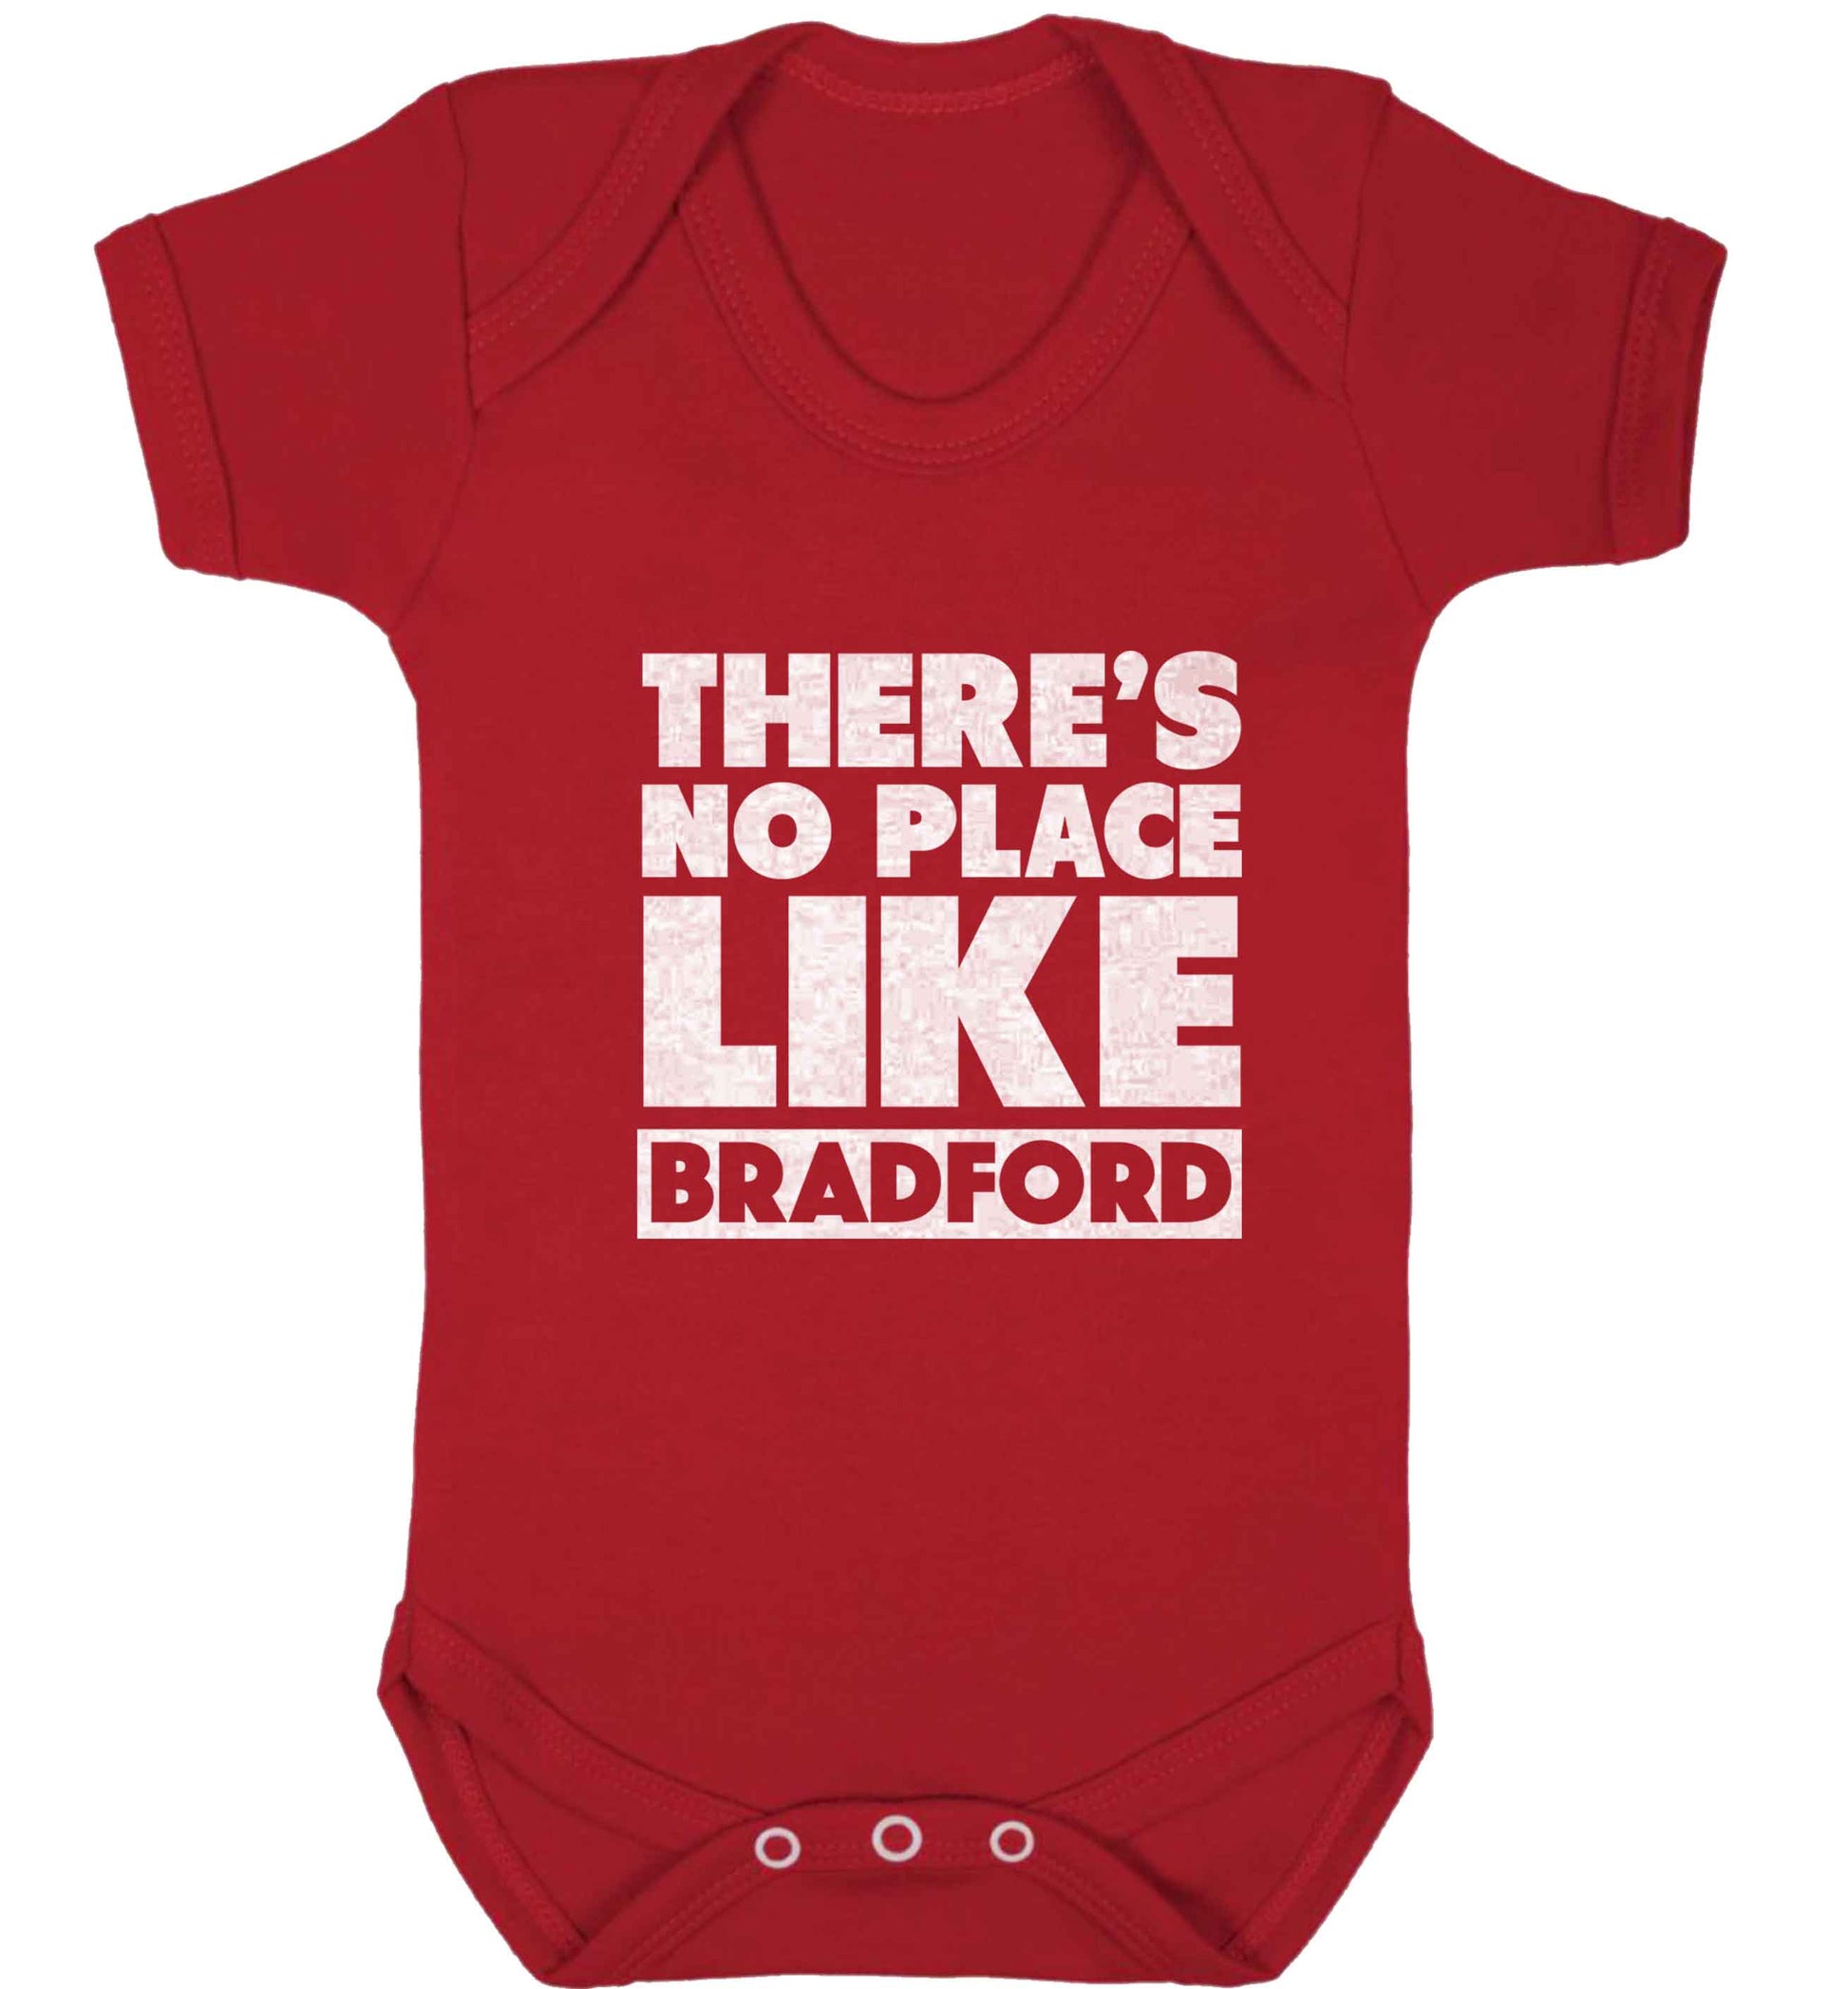 There's no place like Bradford baby vest red 18-24 months